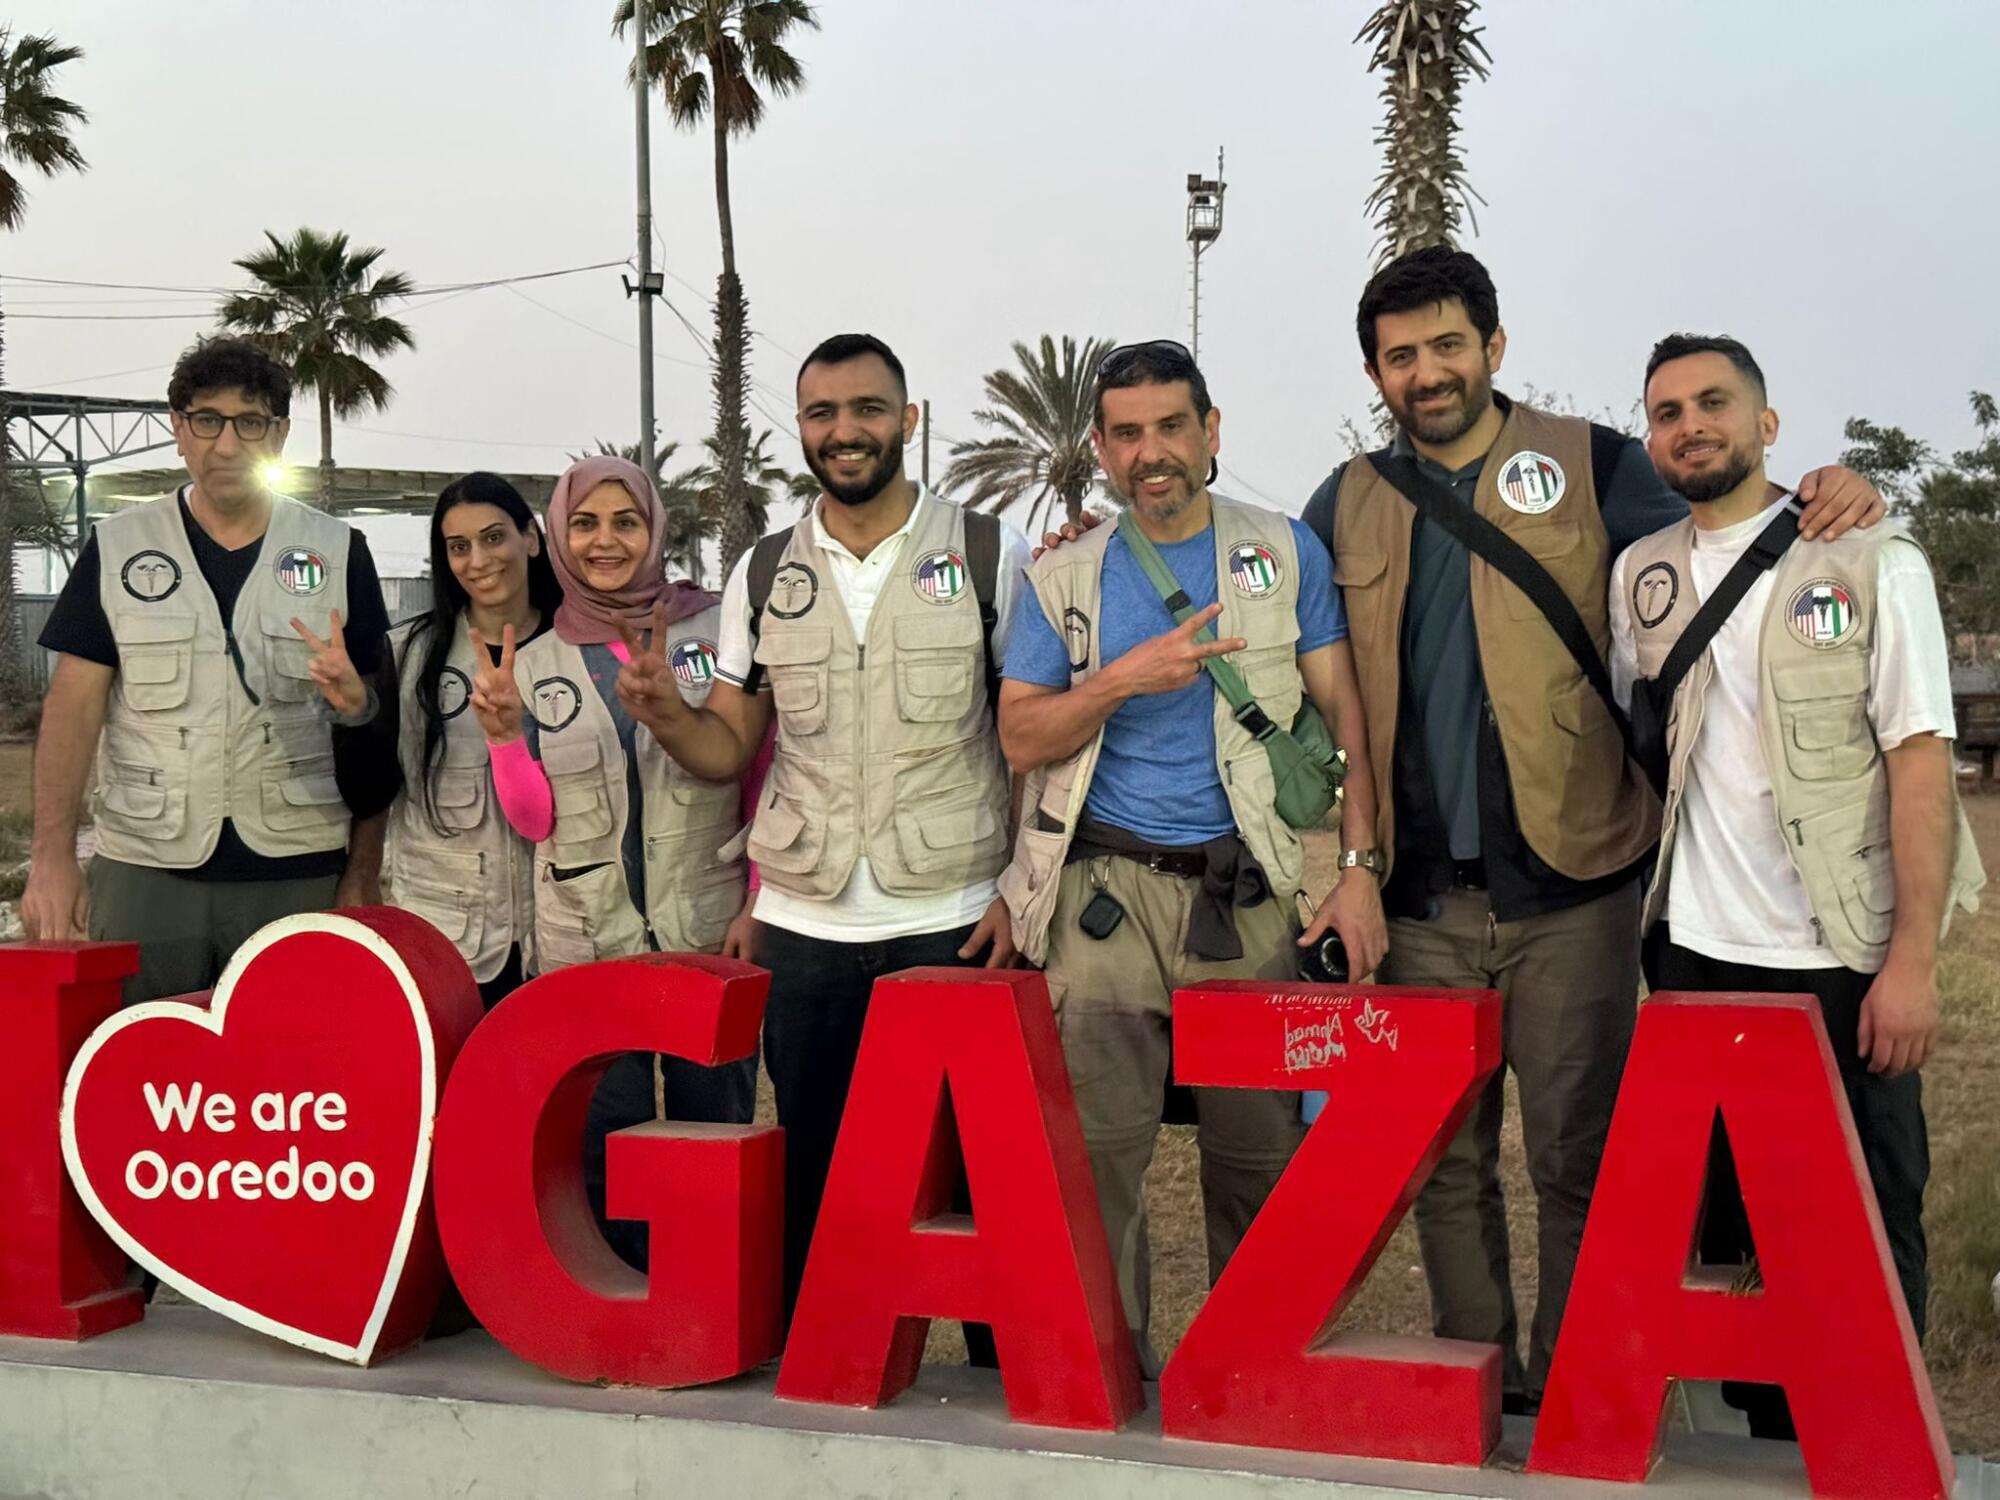 A group of medical workers in vests poses at an "I (heart) Gaza" sign.